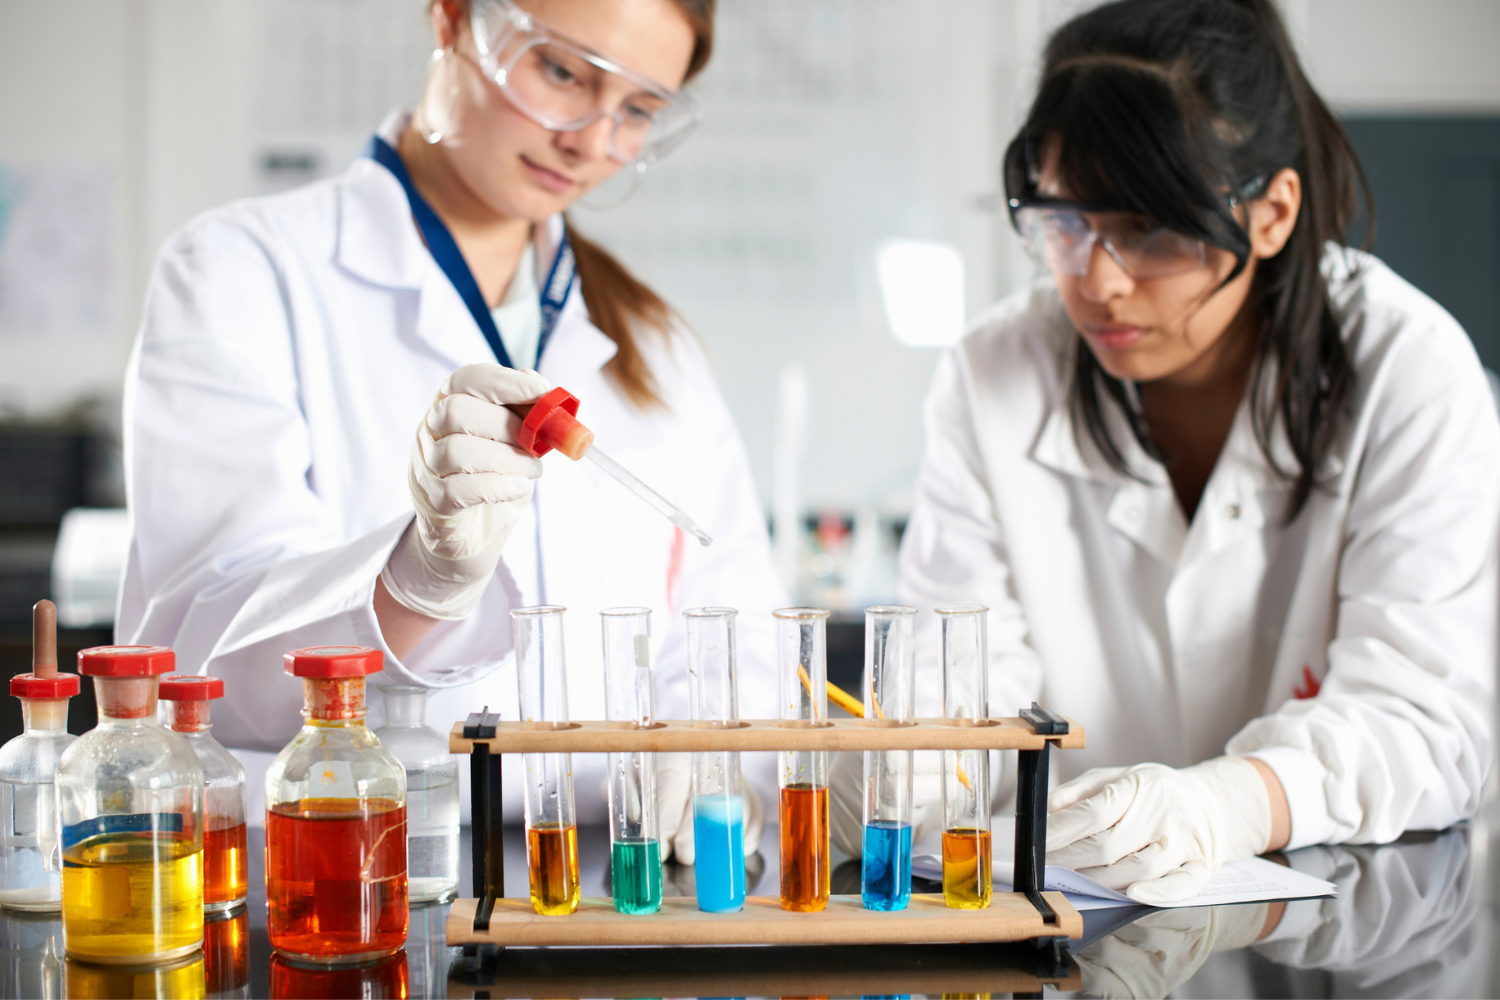 two scientists examining beakers in a chemistry lab